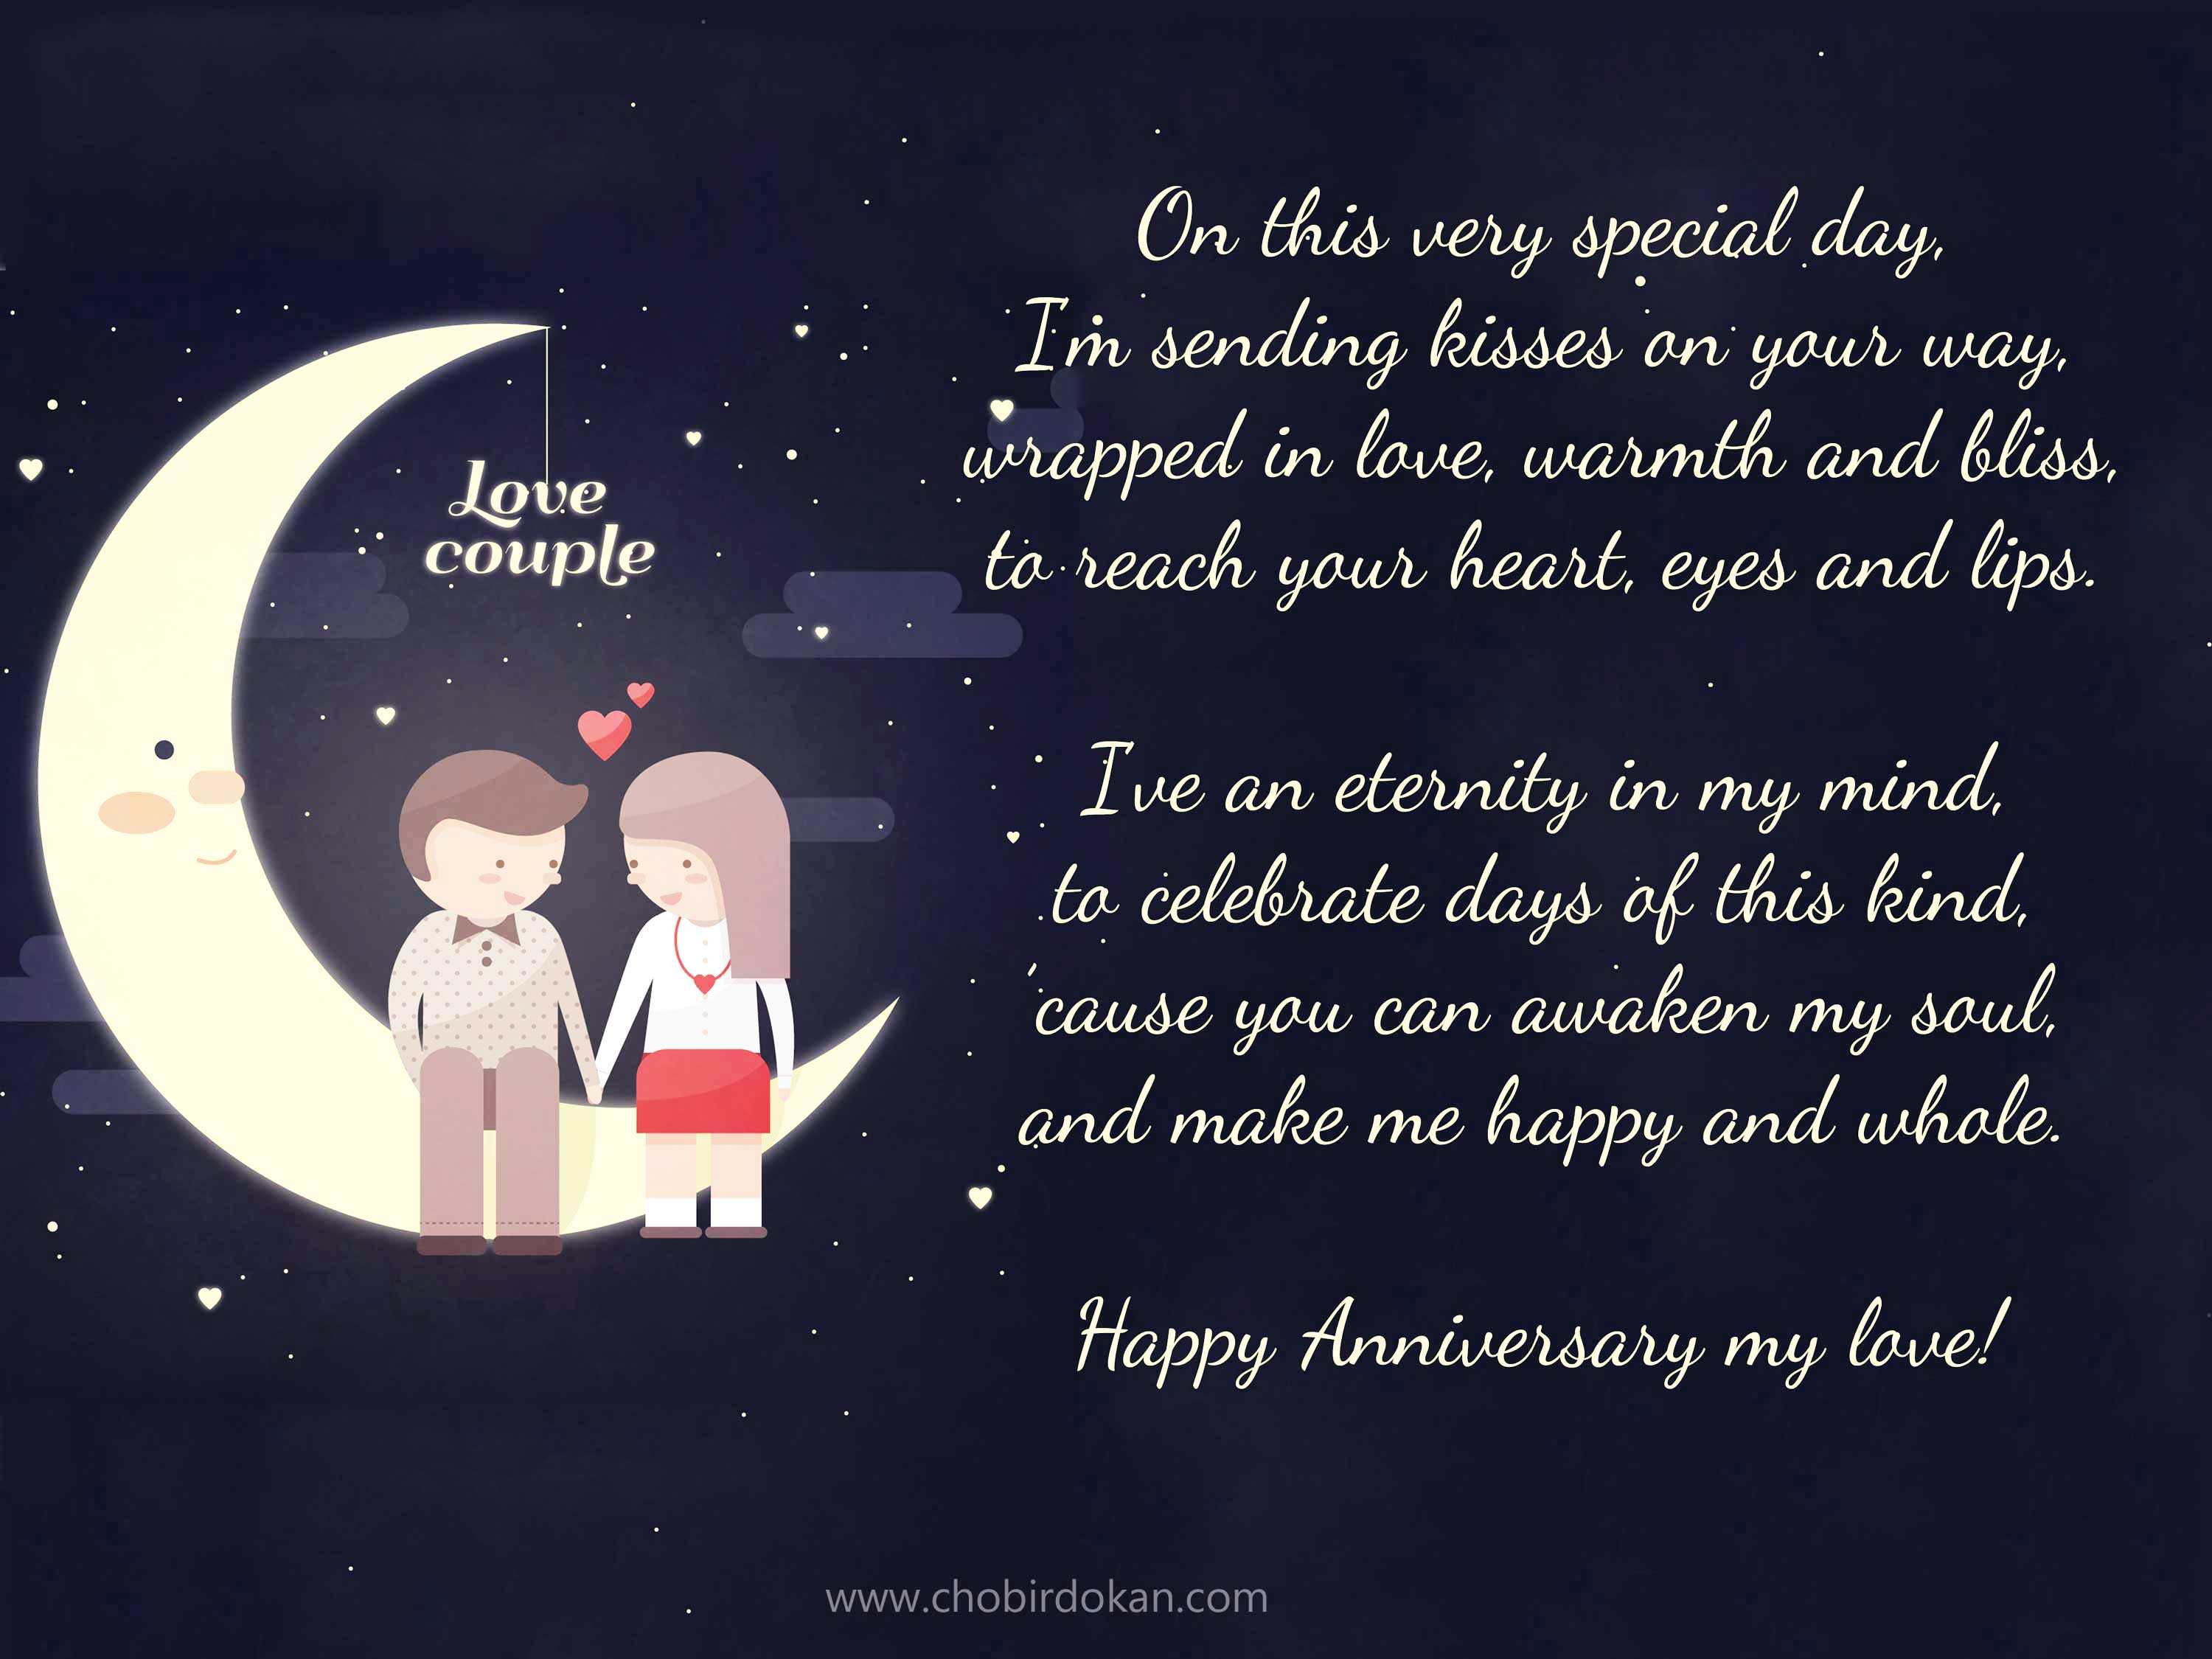 Romantic Anniversary Poems For Her For Wife Or Girlfriend Poems